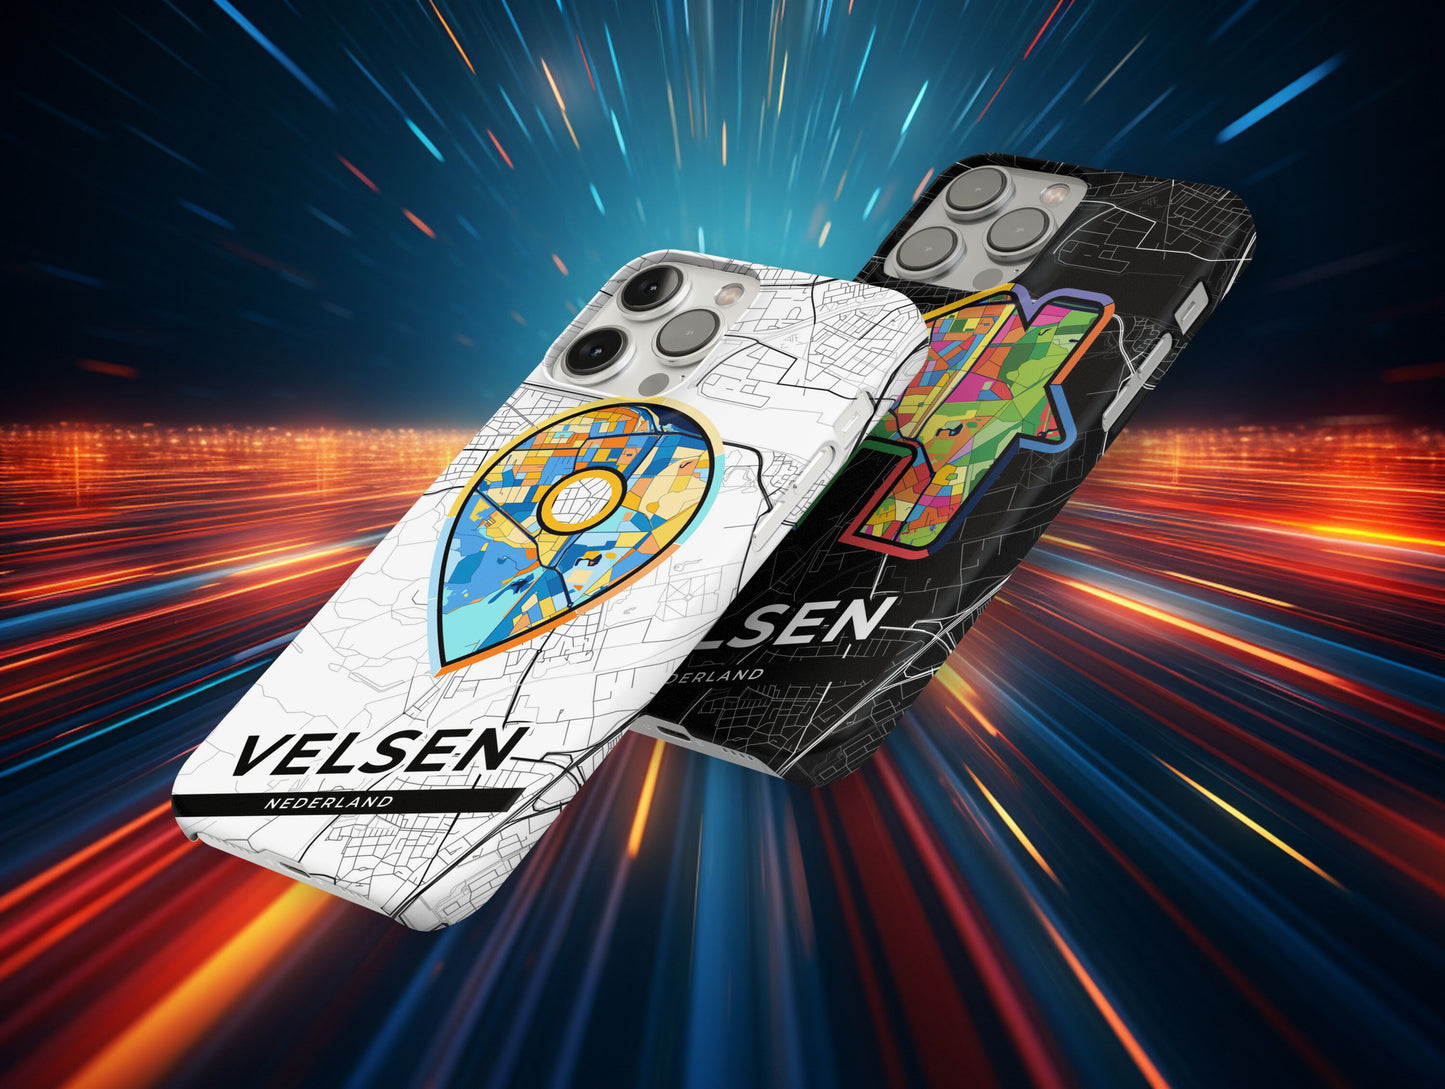 Velsen Netherlands slim phone case with colorful icon